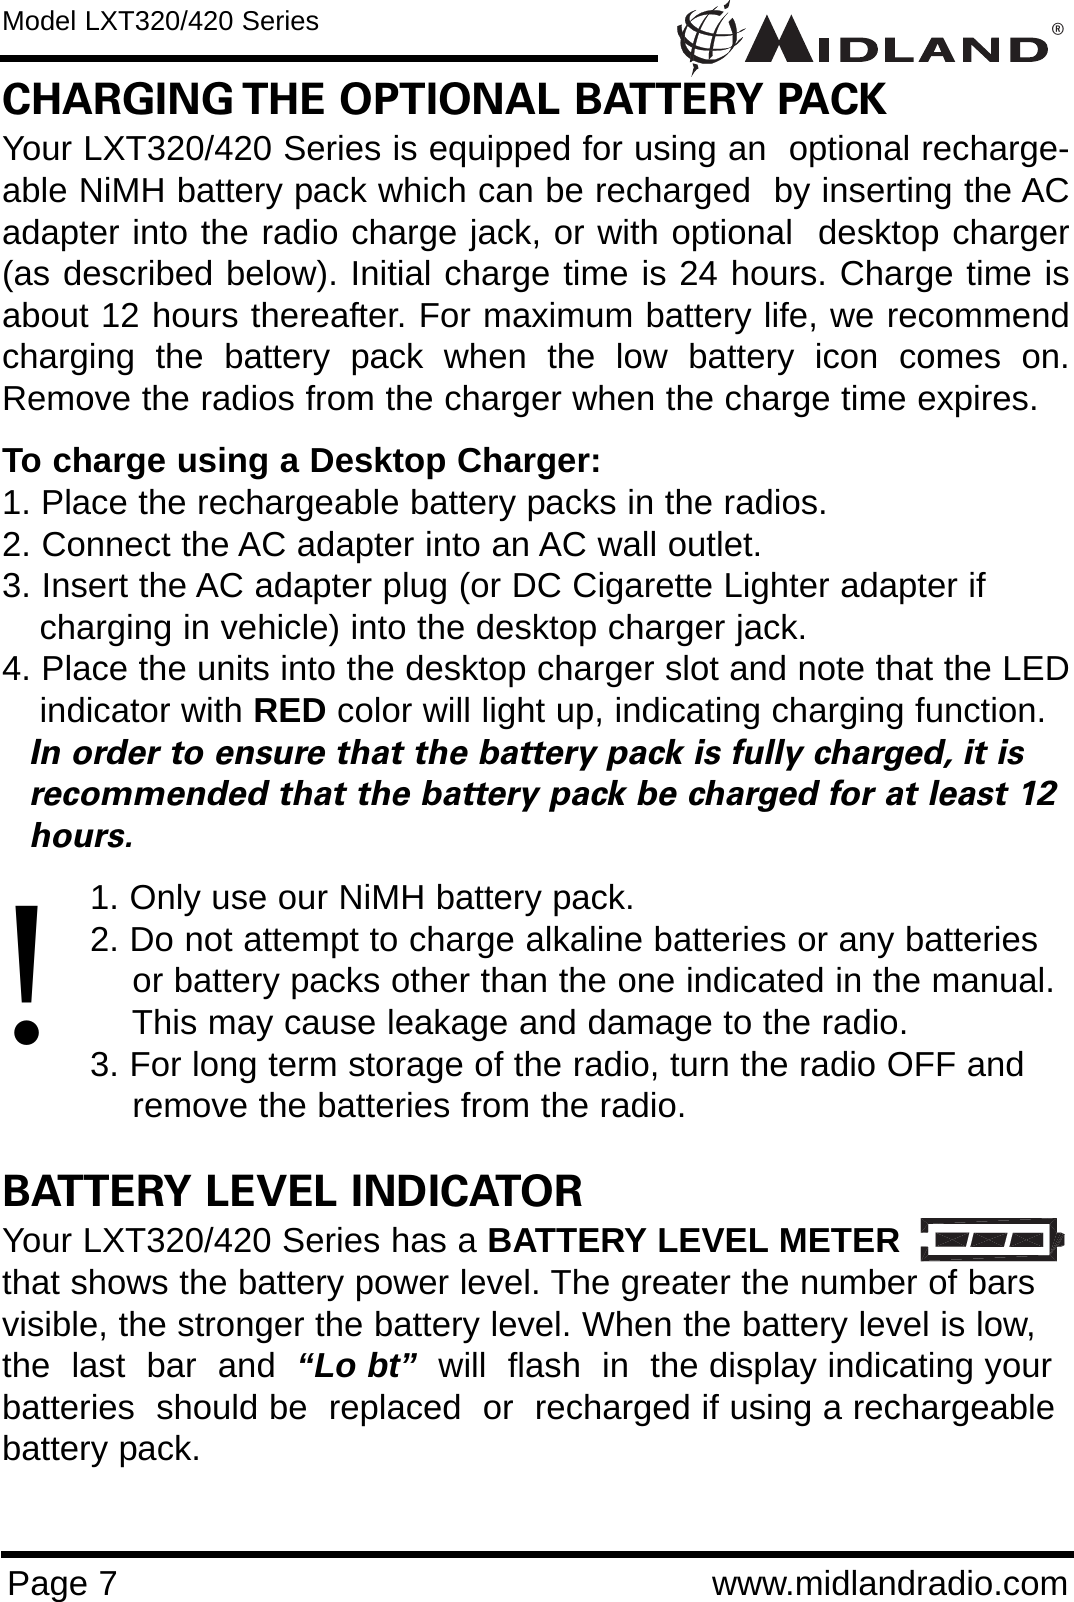 ®Page 7 www.midlandradio.comCHARGING THE OPTIONAL BATTERY PACKYour LXT320/420 Series is equipped for using an  optional recharge-able NiMH battery pack which can be recharged  by inserting the ACadapter into the radio charge jack, or with optional  desktop charger(as described below). Initial charge time is 24 hours. Charge time isabout 12 hours thereafter. For maximum battery life, we recommendcharging the battery pack when the low battery icon comes on.Remove the radios from the charger when the charge time expires.To charge using a Desktop Charger:1. Place the rechargeable battery packs in the radios.2. Connect the AC adapter into an AC wall outlet.3. Insert the AC adapter plug (or DC Cigarette Lighter adapter if    charging in vehicle) into the desktop charger jack.4. Place the units into the desktop charger slot and note that the LEDindicator with RED color will light up, indicating charging function. In order to ensure that the battery pack is fully charged, it is  recommended that the battery pack be charged for at least 12 hours.1. Only use our NiMH battery pack.2. Do not attempt to charge alkaline batteries or any batteries or battery packs other than the one indicated in the manual. This may cause leakage and damage to the radio.3. For long term storage of the radio, turn the radio OFF and remove the batteries from the radio.BATTERY LEVEL INDICATORYour LXT320/420 Series has a BATTERY LEVEL METERthat shows the battery power level. The greater the number of barsvisible, the stronger the battery level. When the battery level is low,the  last  bar  and  “Lo bt” will  flash  in  the display indicating yourbatteries  should be  replaced  or  recharged if using a rechargeablebattery pack.Model LXT320/420 Series!